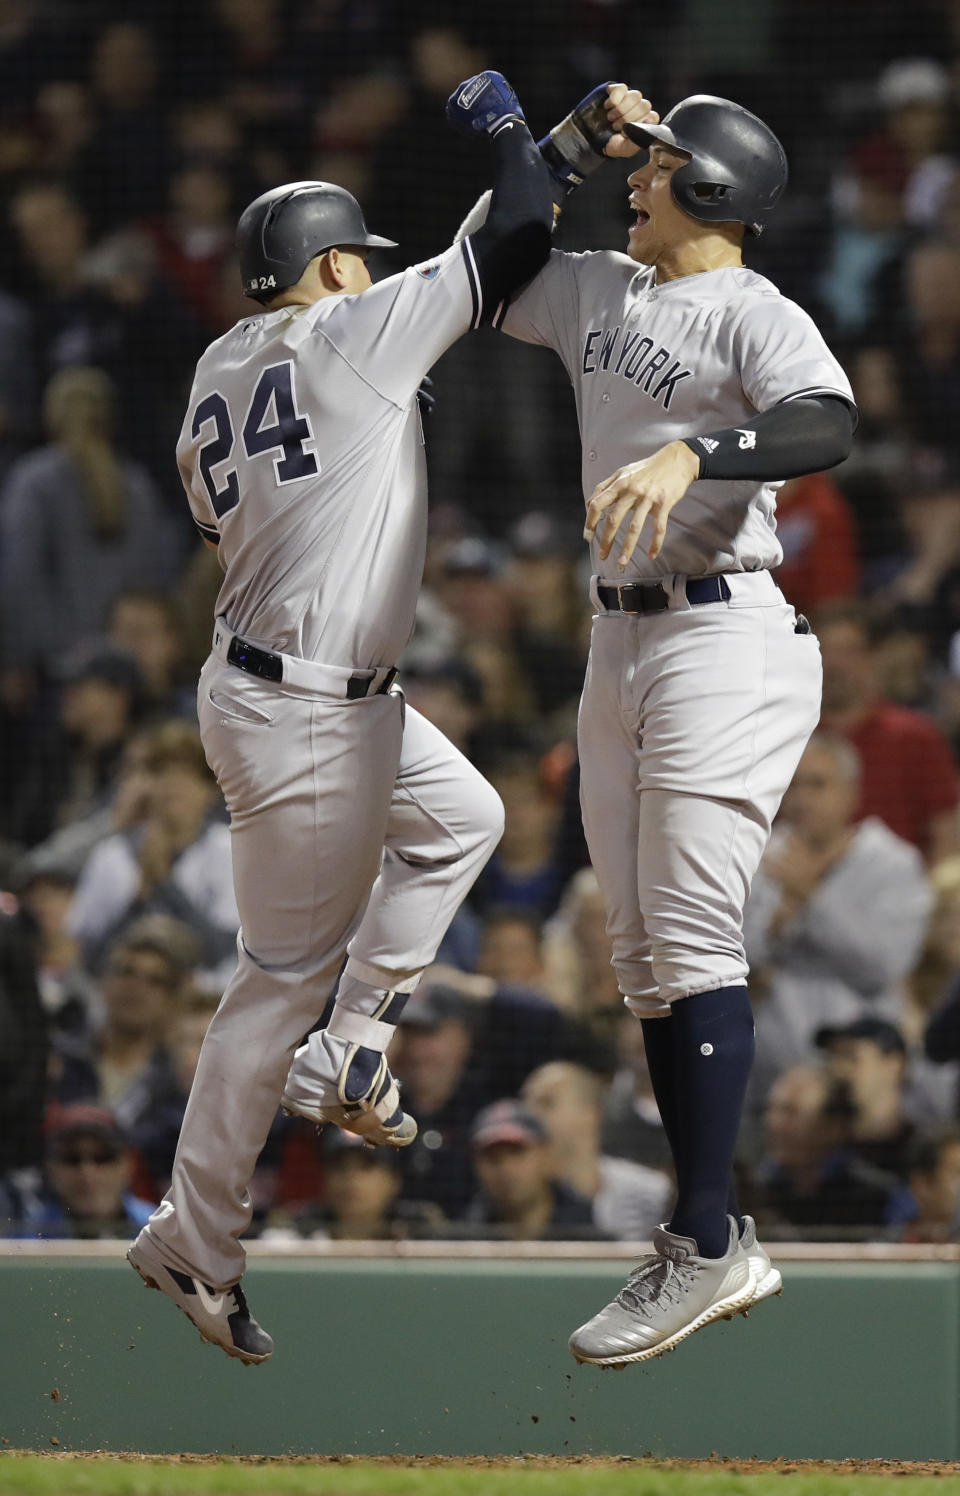 New York Yankees' Gary Sanchez, left, celebrates after his three-run home run with Aaron Judge against the Boston Red Sox during the seventh inning of Game 2 of a baseball American League Division Series, Saturday, Oct. 6, 2018, in Boston. (AP Photo/Charles Krupa)